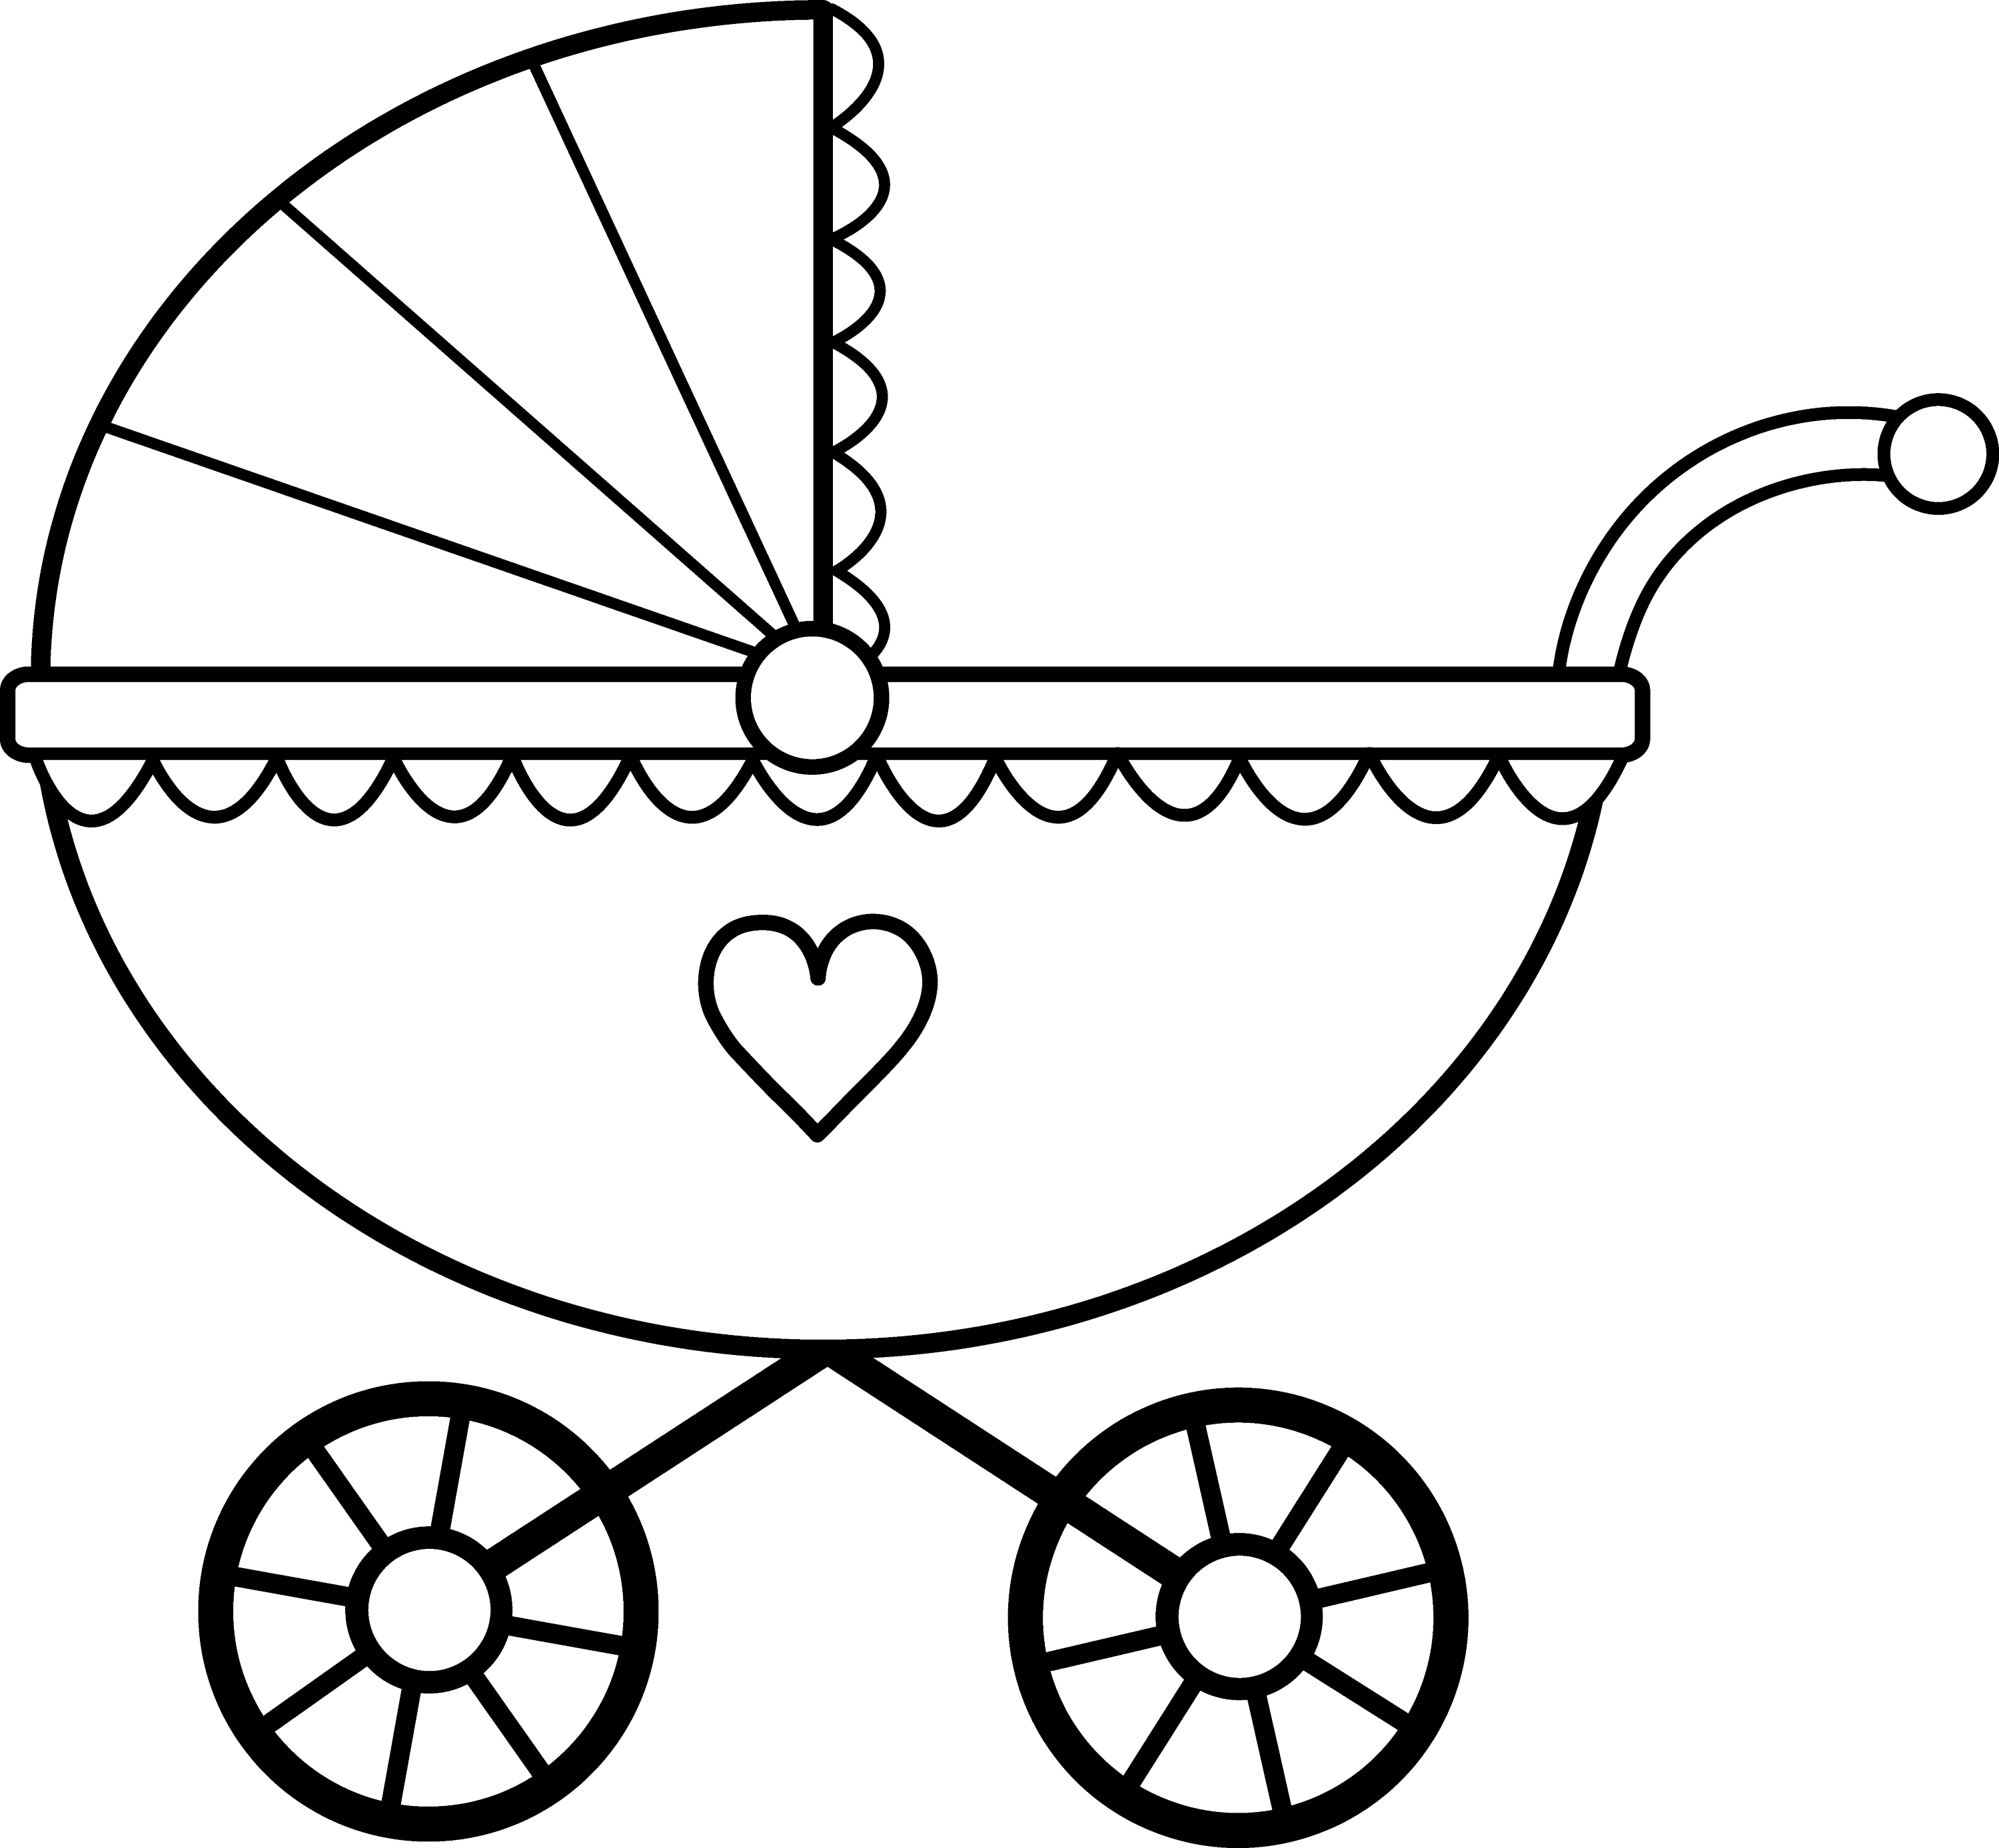 Baby Carriage Clip Art Black and White